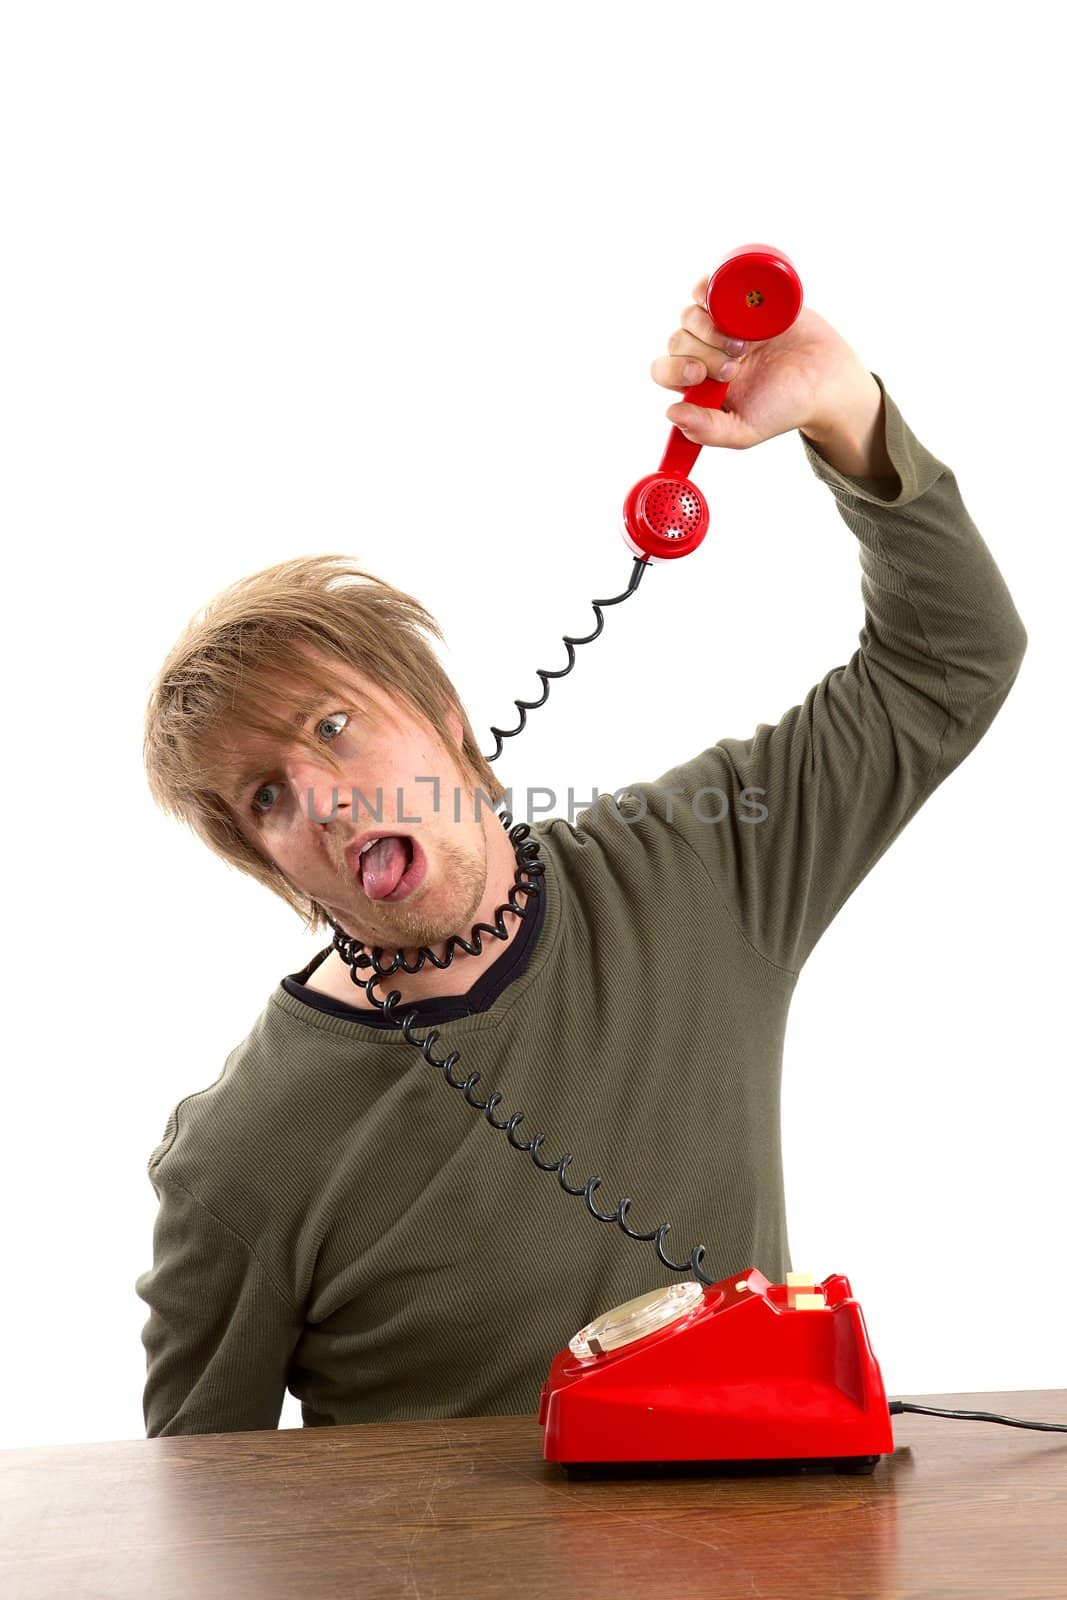 Man hanging himself with a phone cord